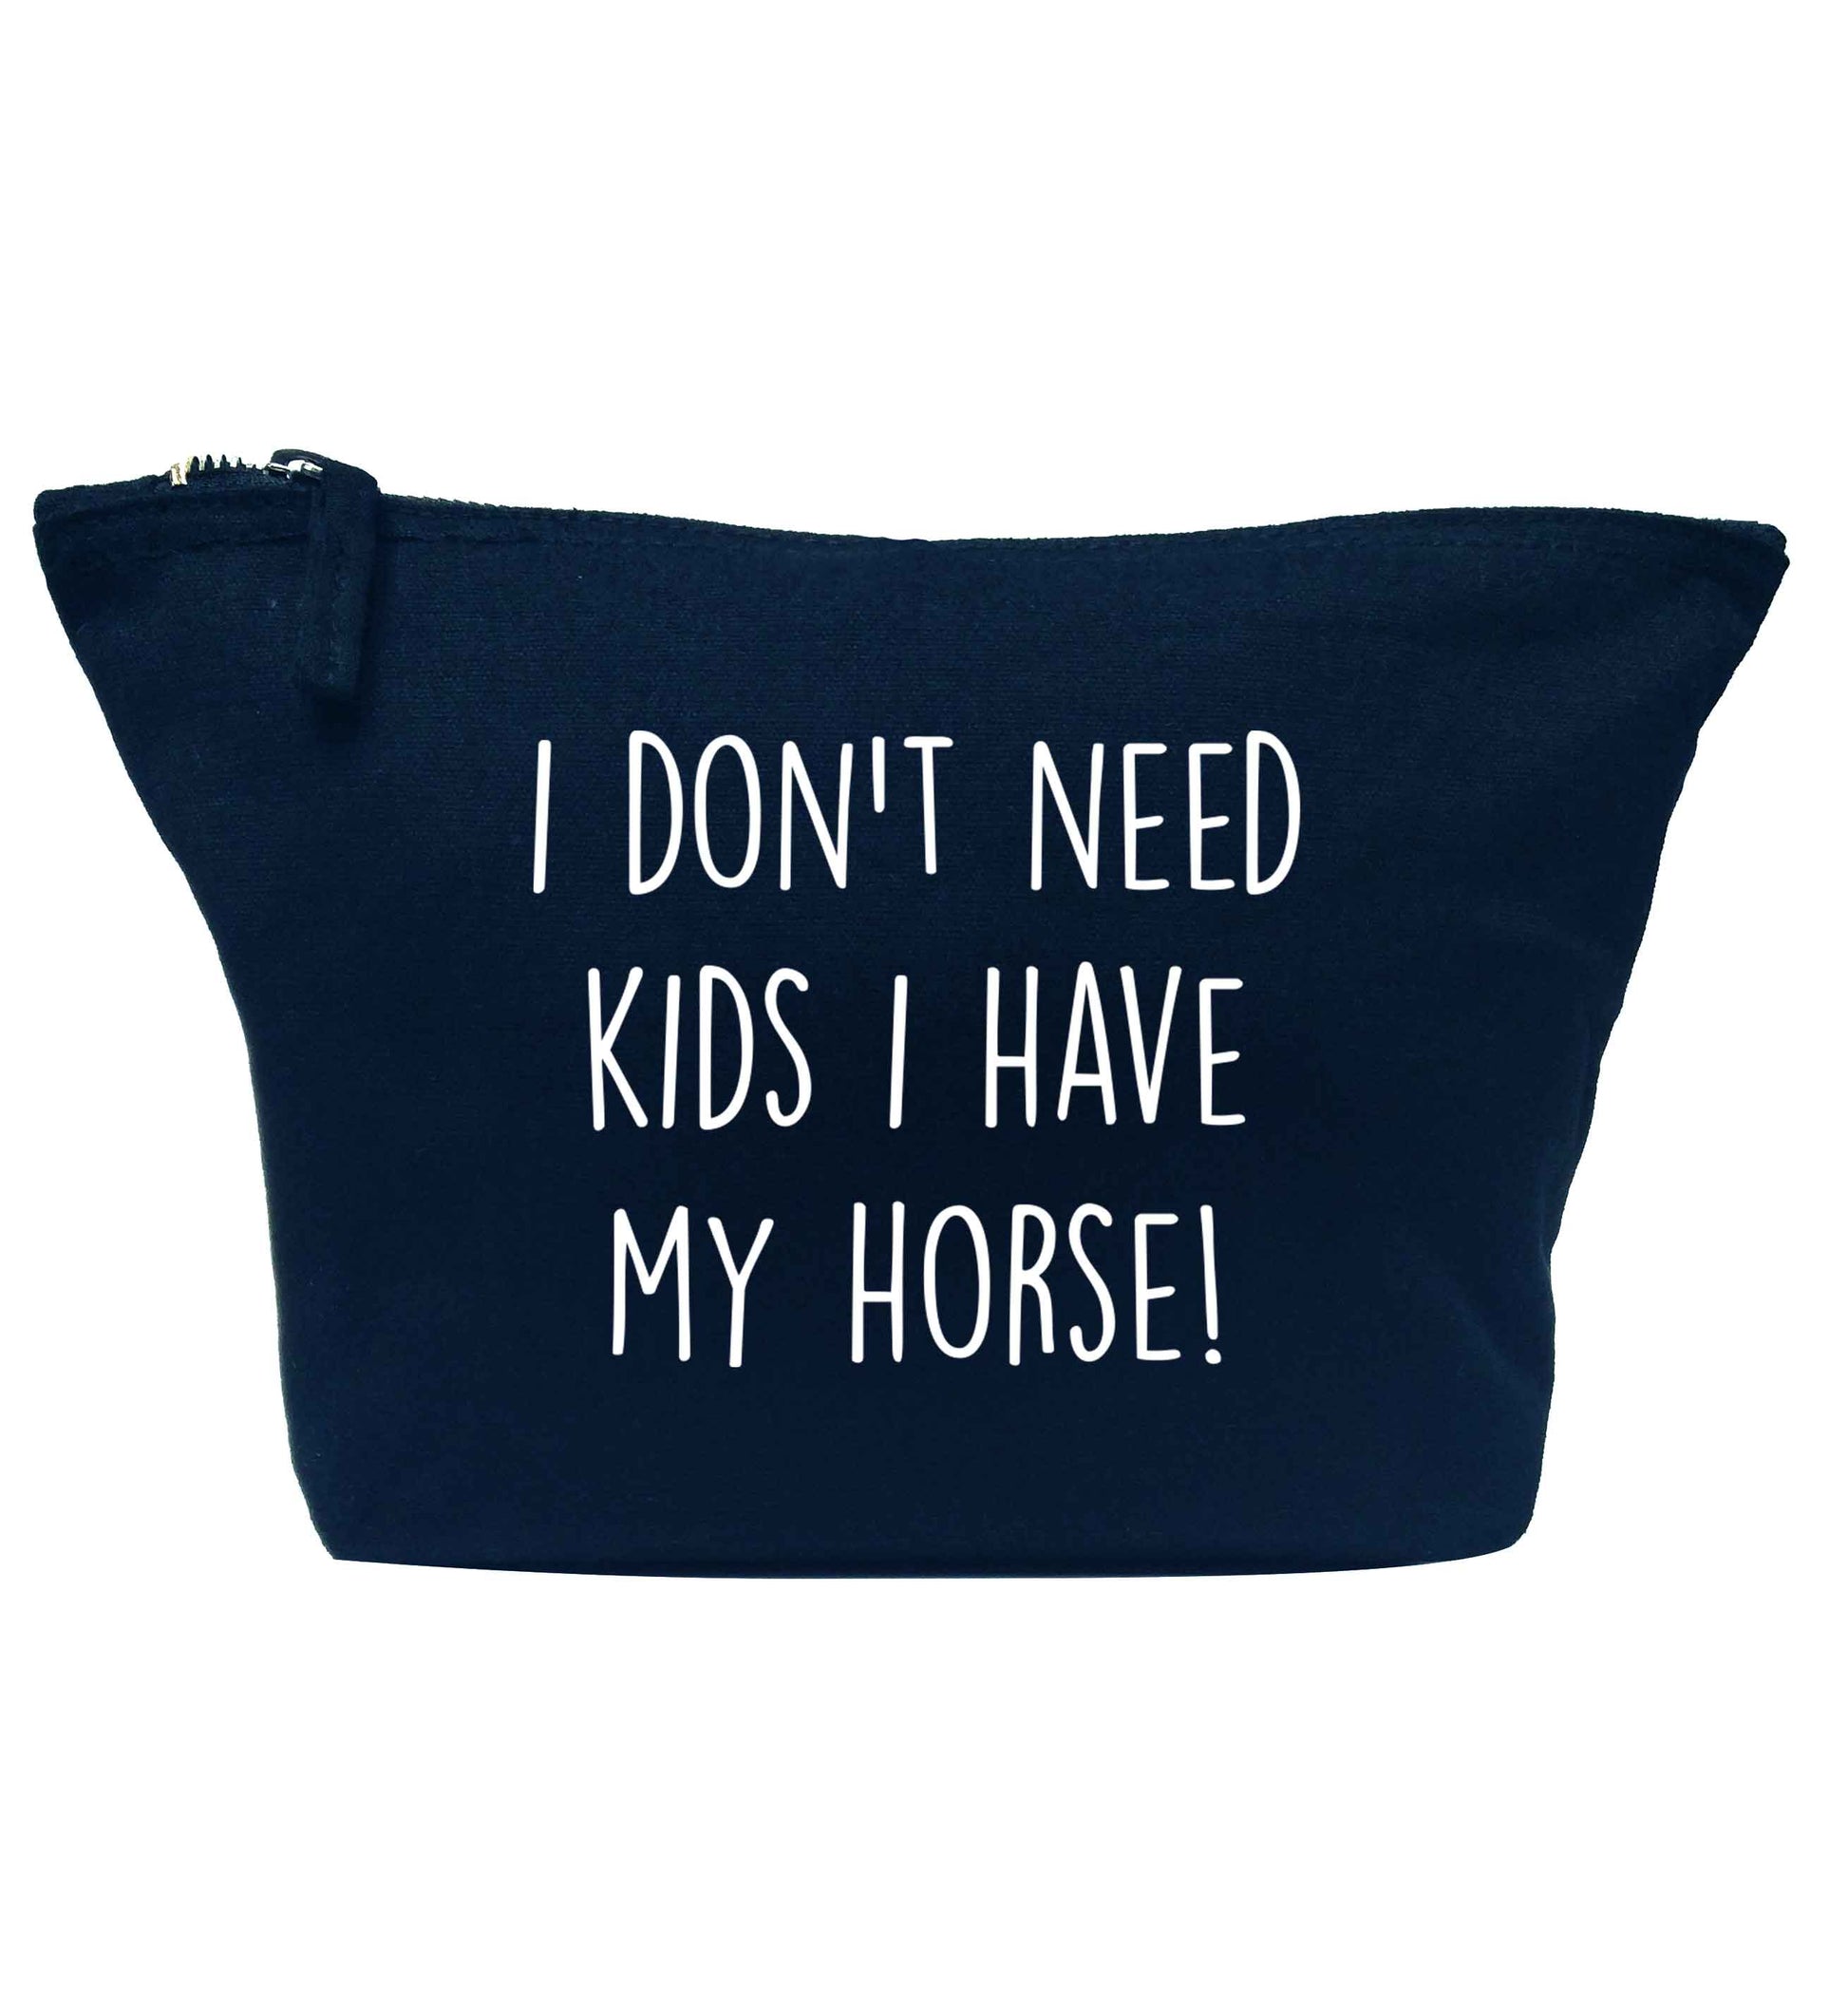 I don't need kids I have my horse navy makeup bag